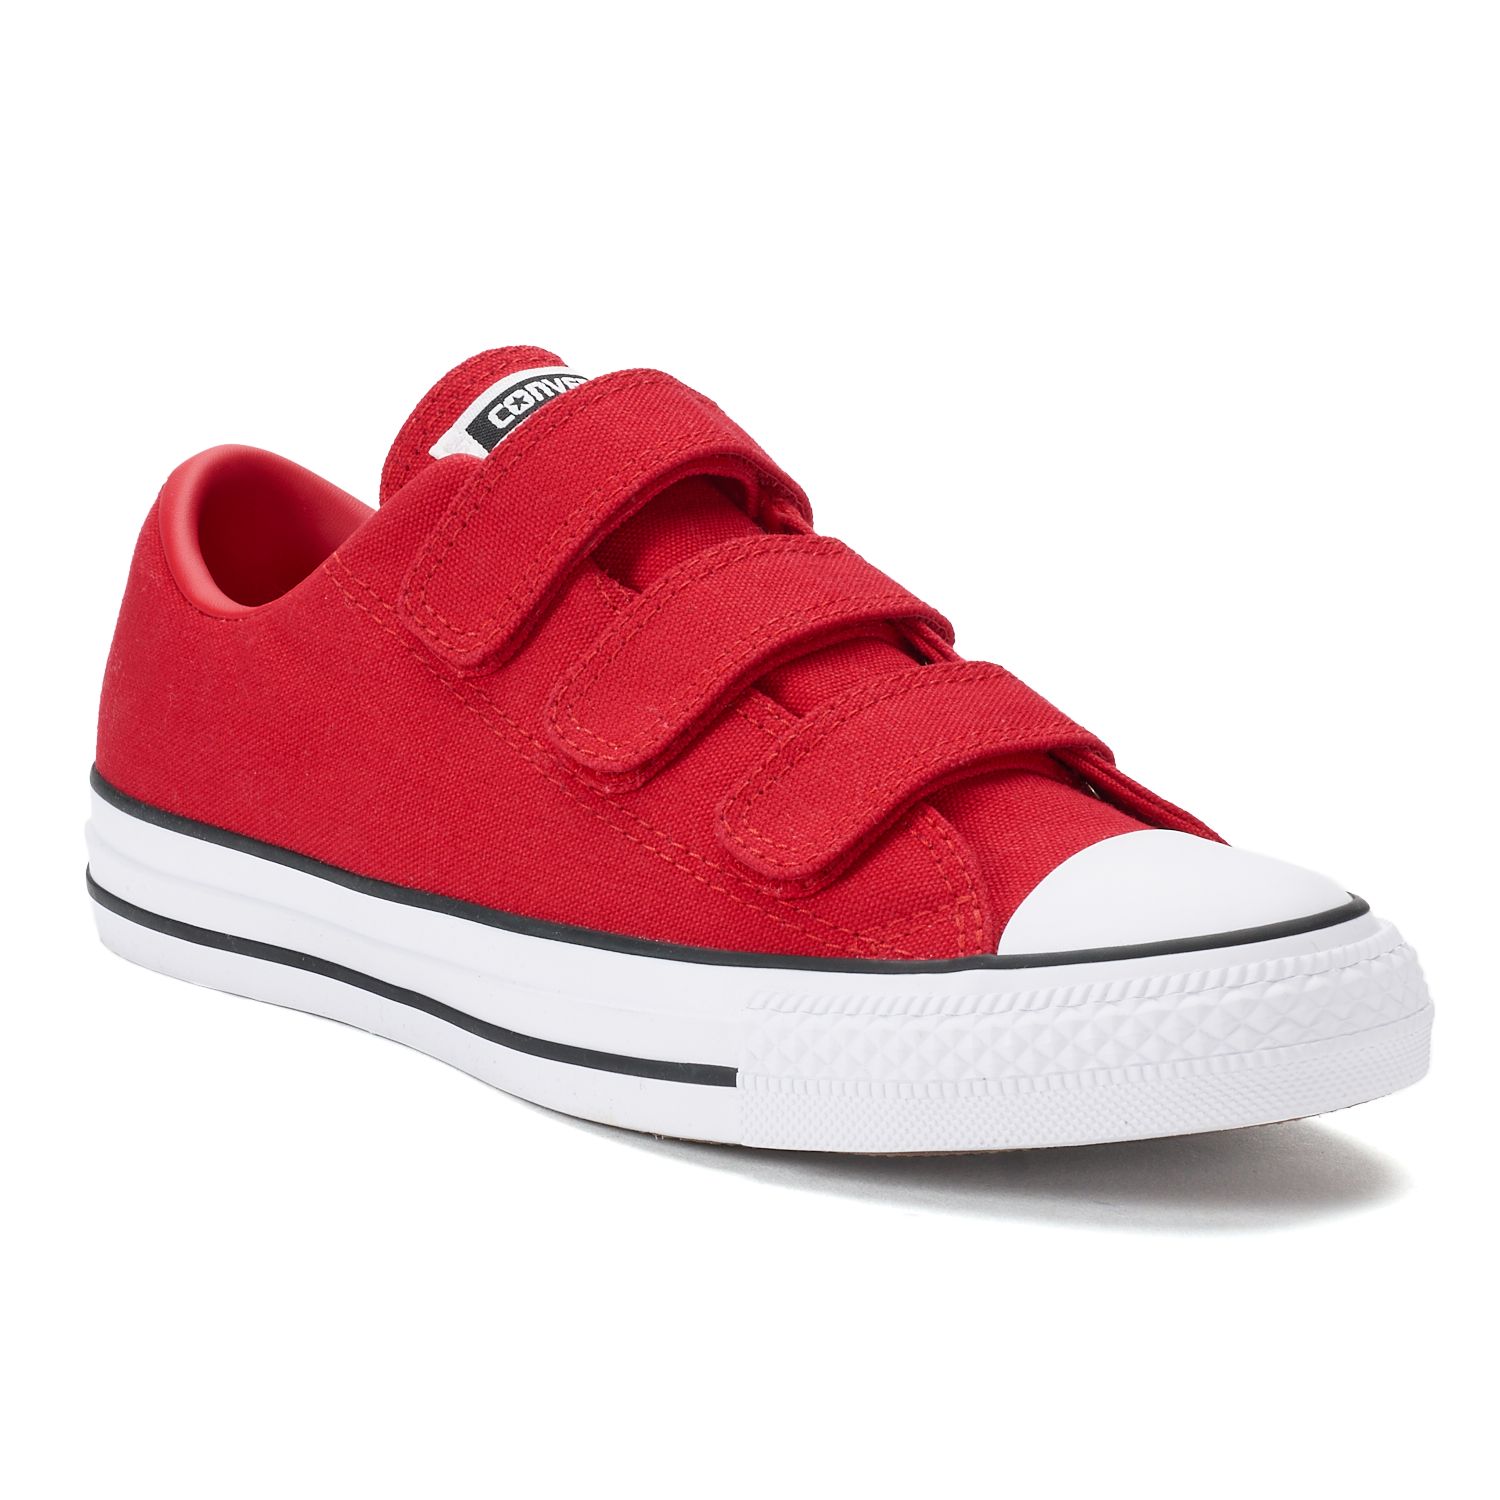 Converse Chuck Taylor All Star 3V Sneakers